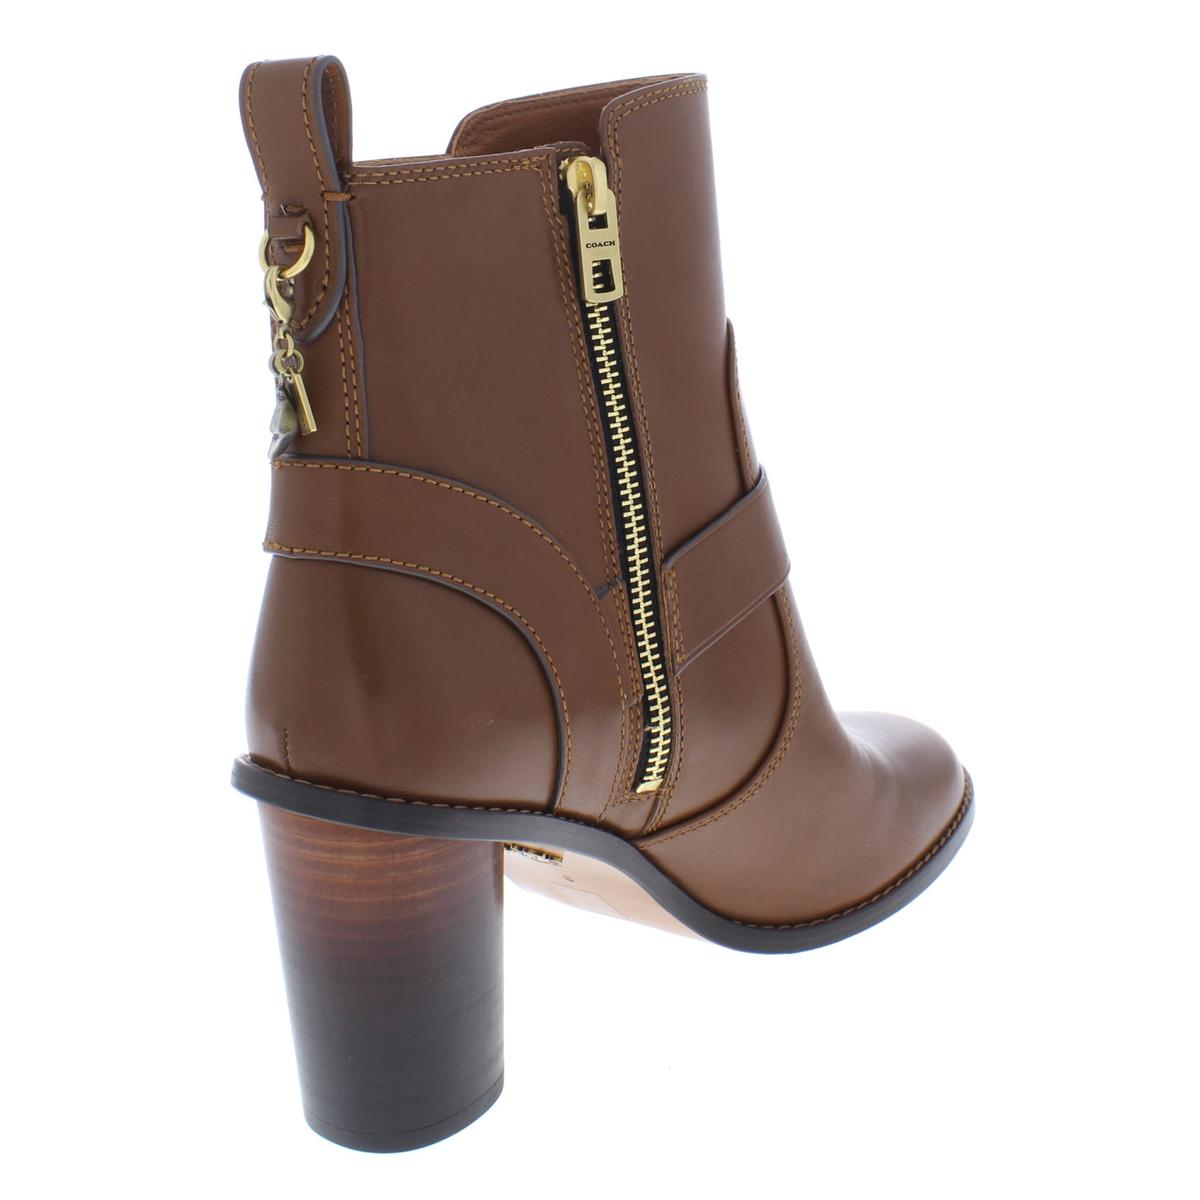 Coach Womens Moto Brown Leather Ankle Boots Shoes 7.5 Medium (B,M) BHFO ...